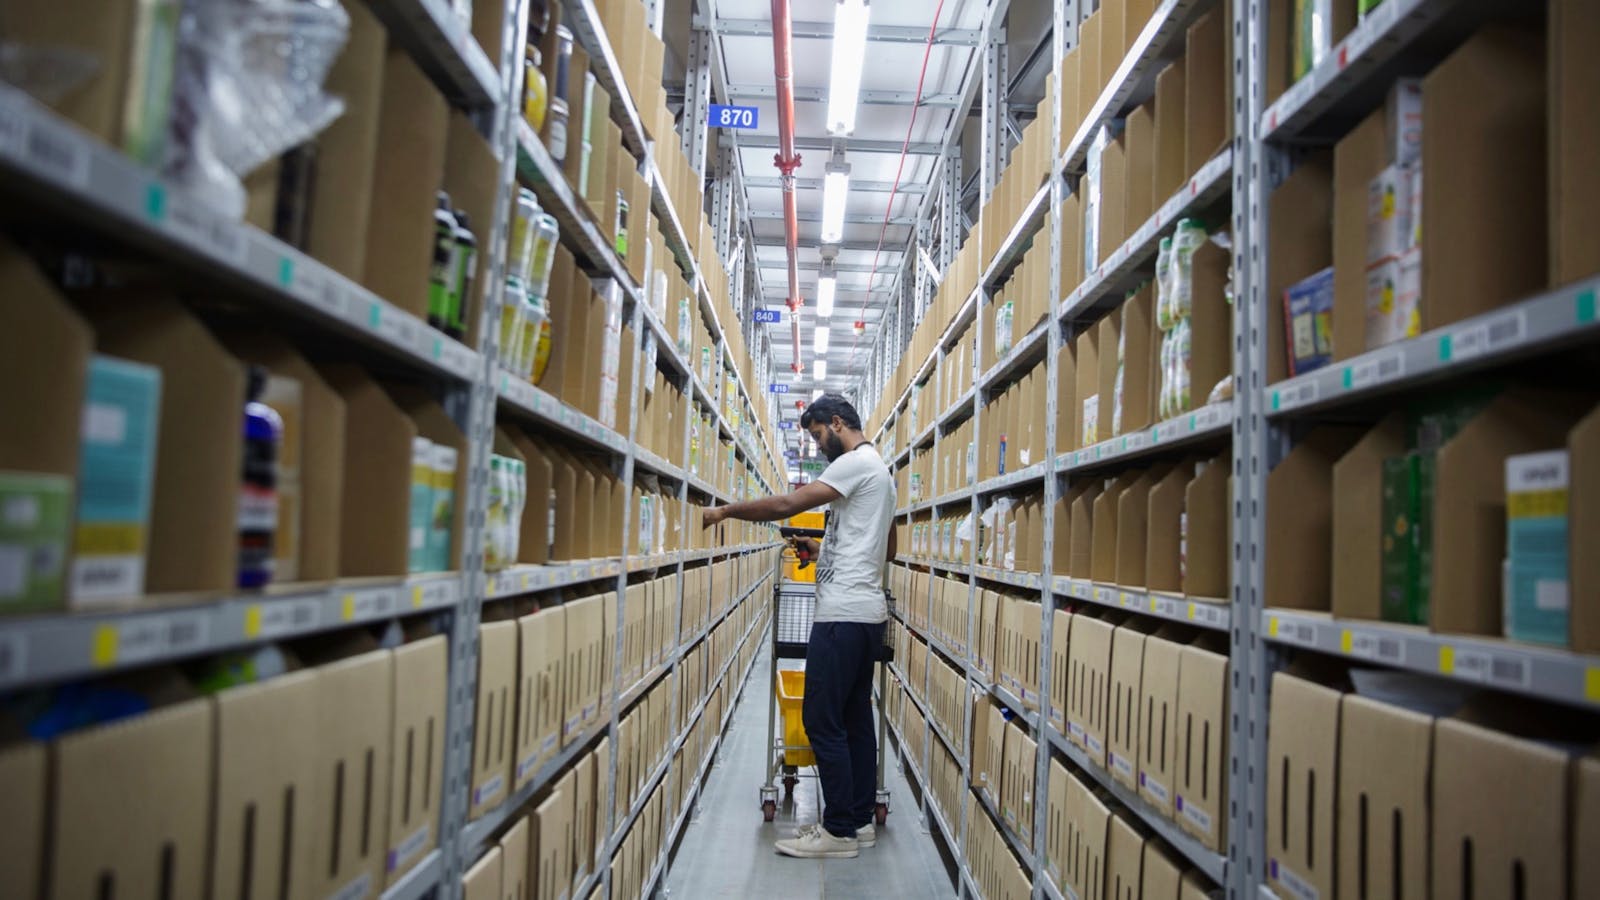 An employee worked at an Amazon warehouse in Bangalore, India, in 2018. Photo: Bloomberg